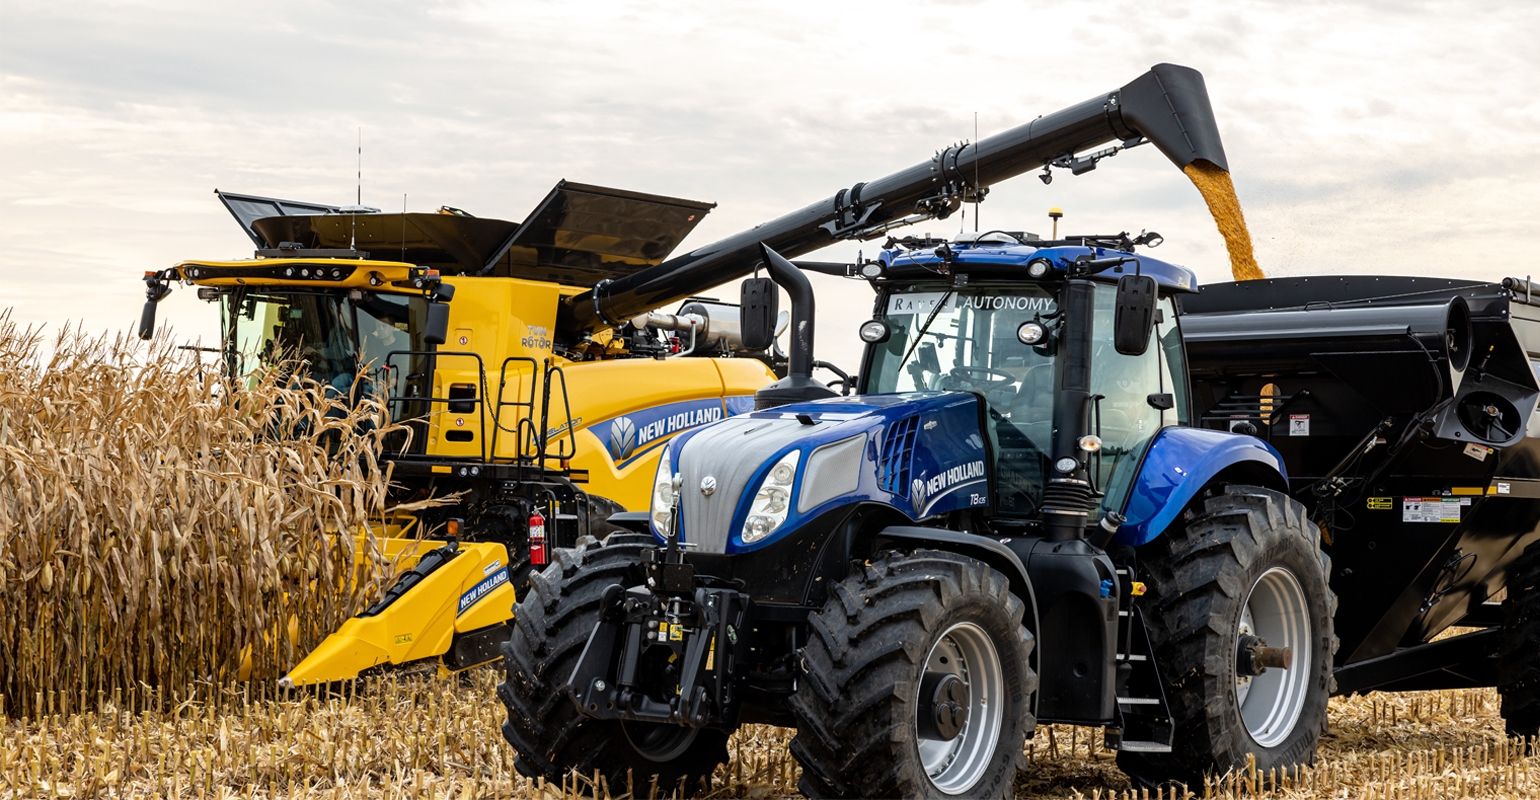 New Holland, Raven introduce driverless tractor